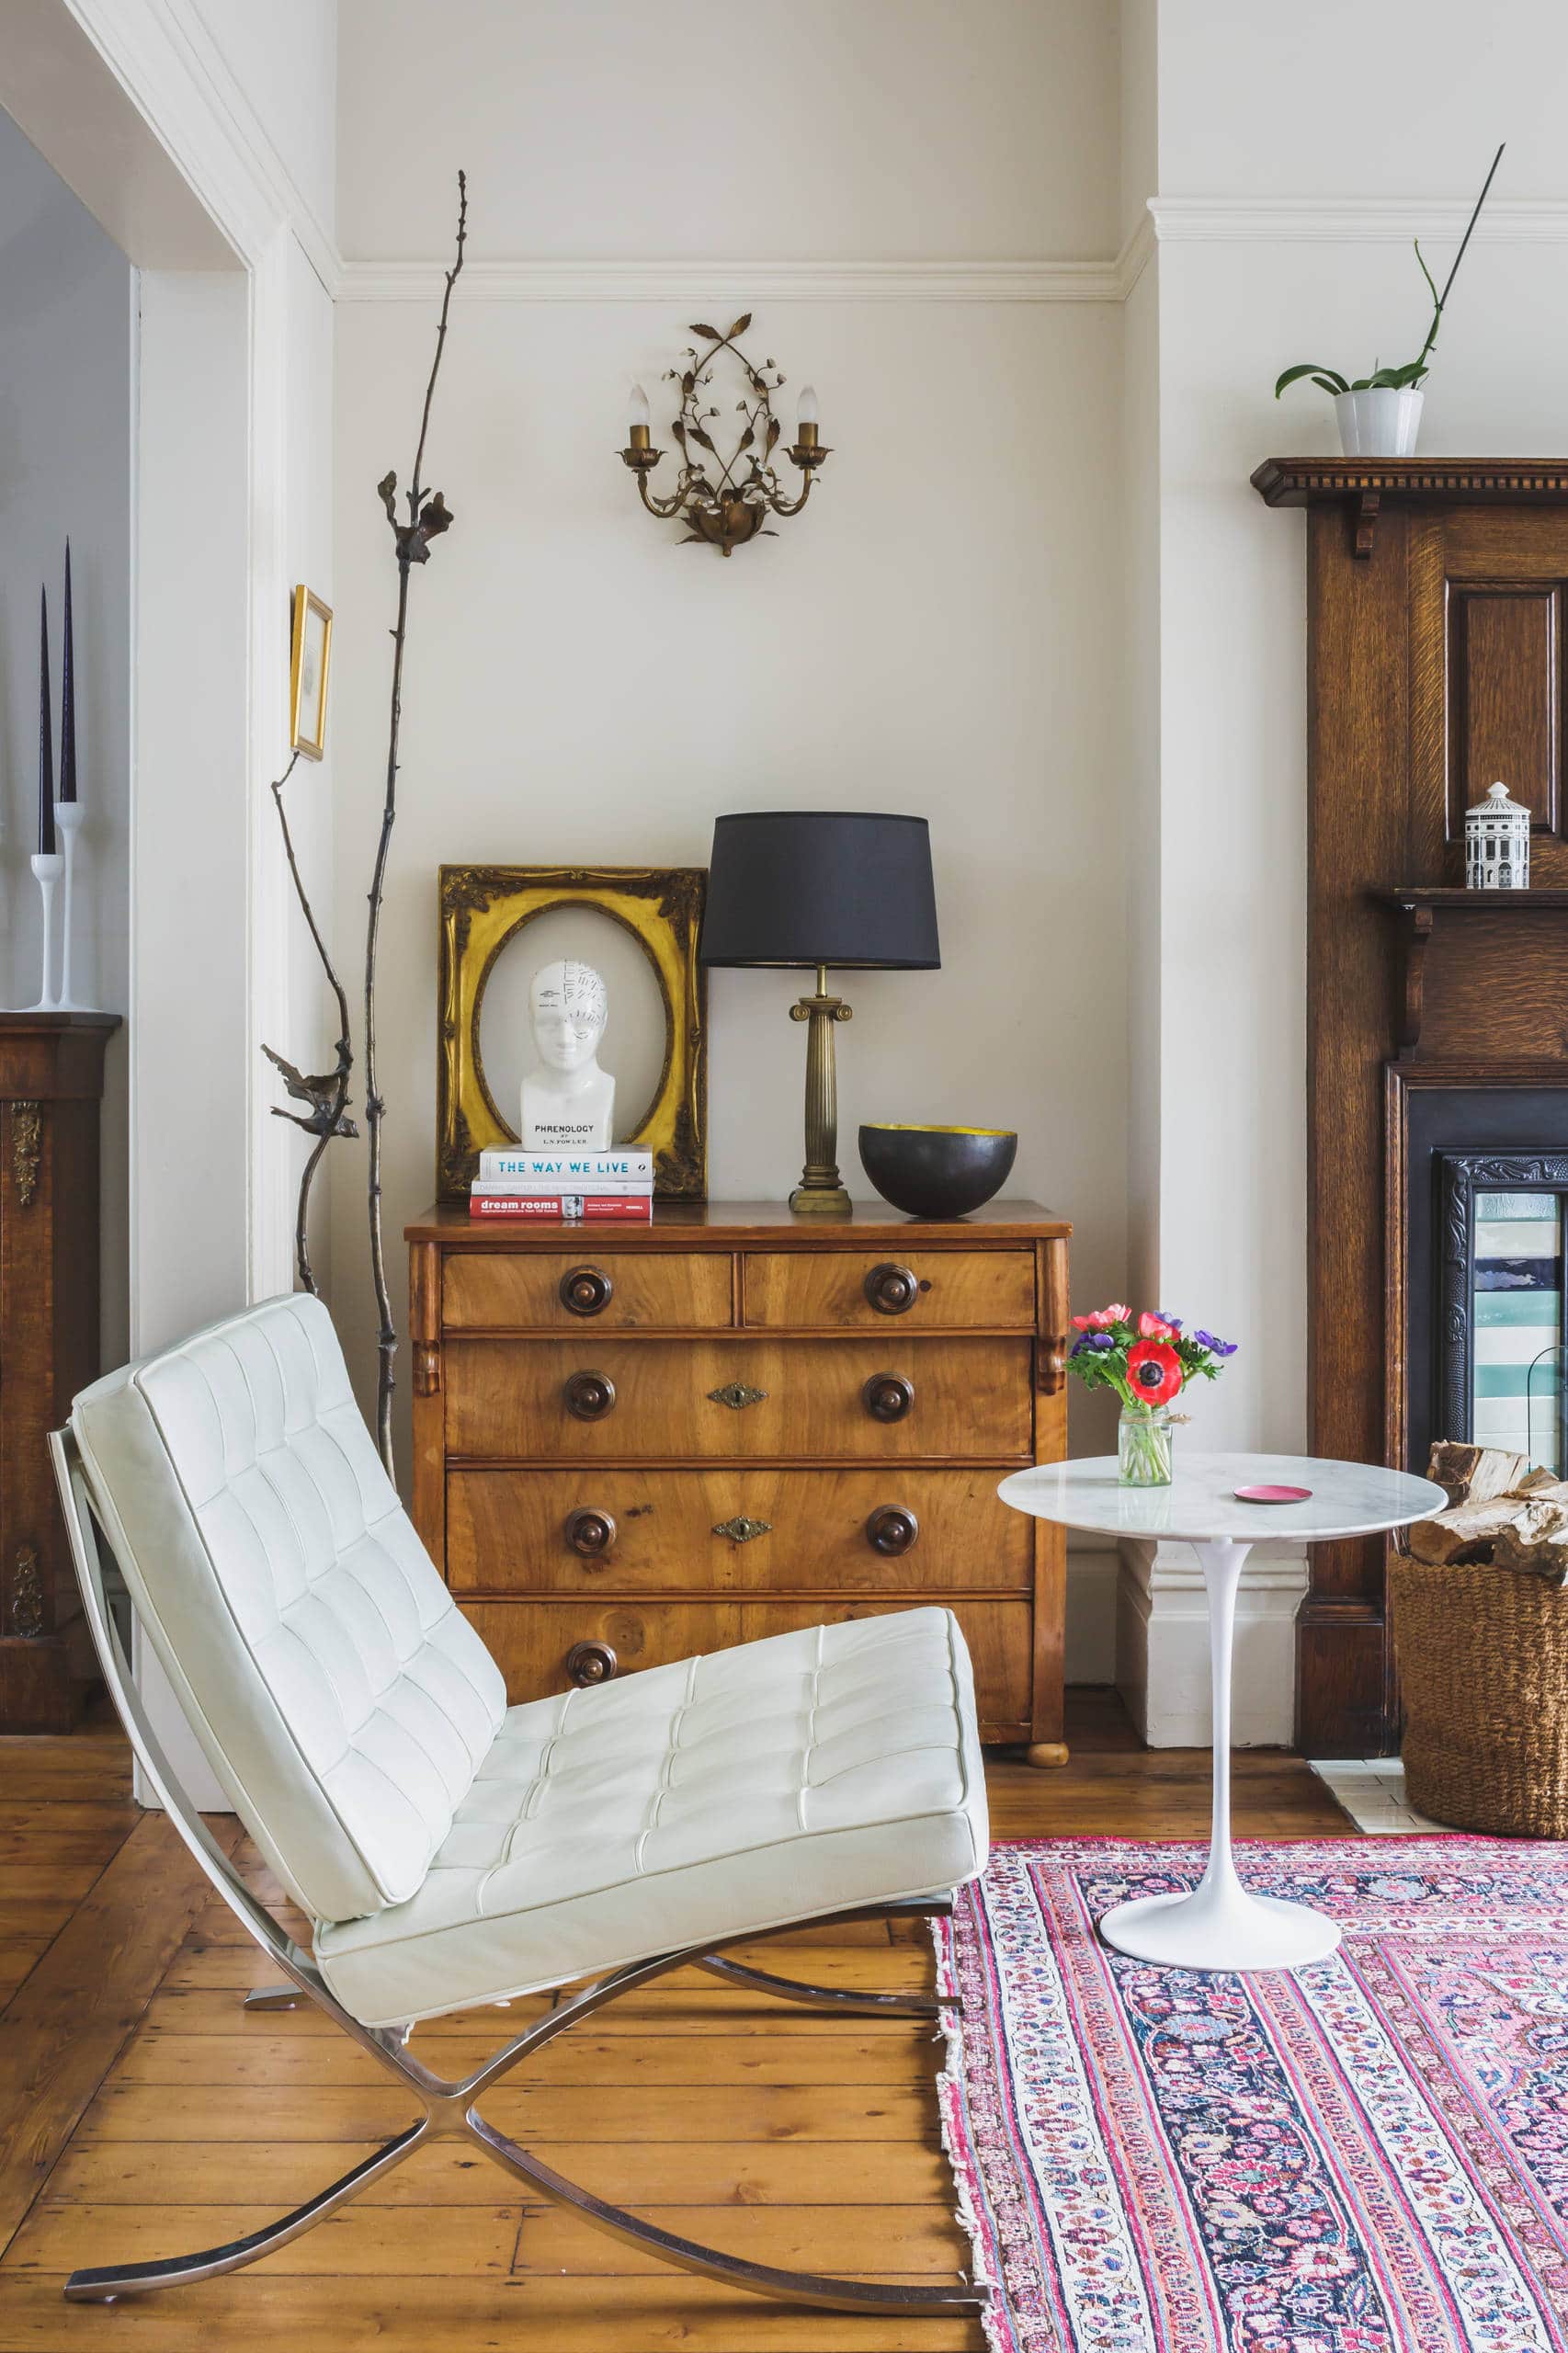 Mixing vintage and antiques in modern spaces idea featuring an antique drawer chest in contemporary living room